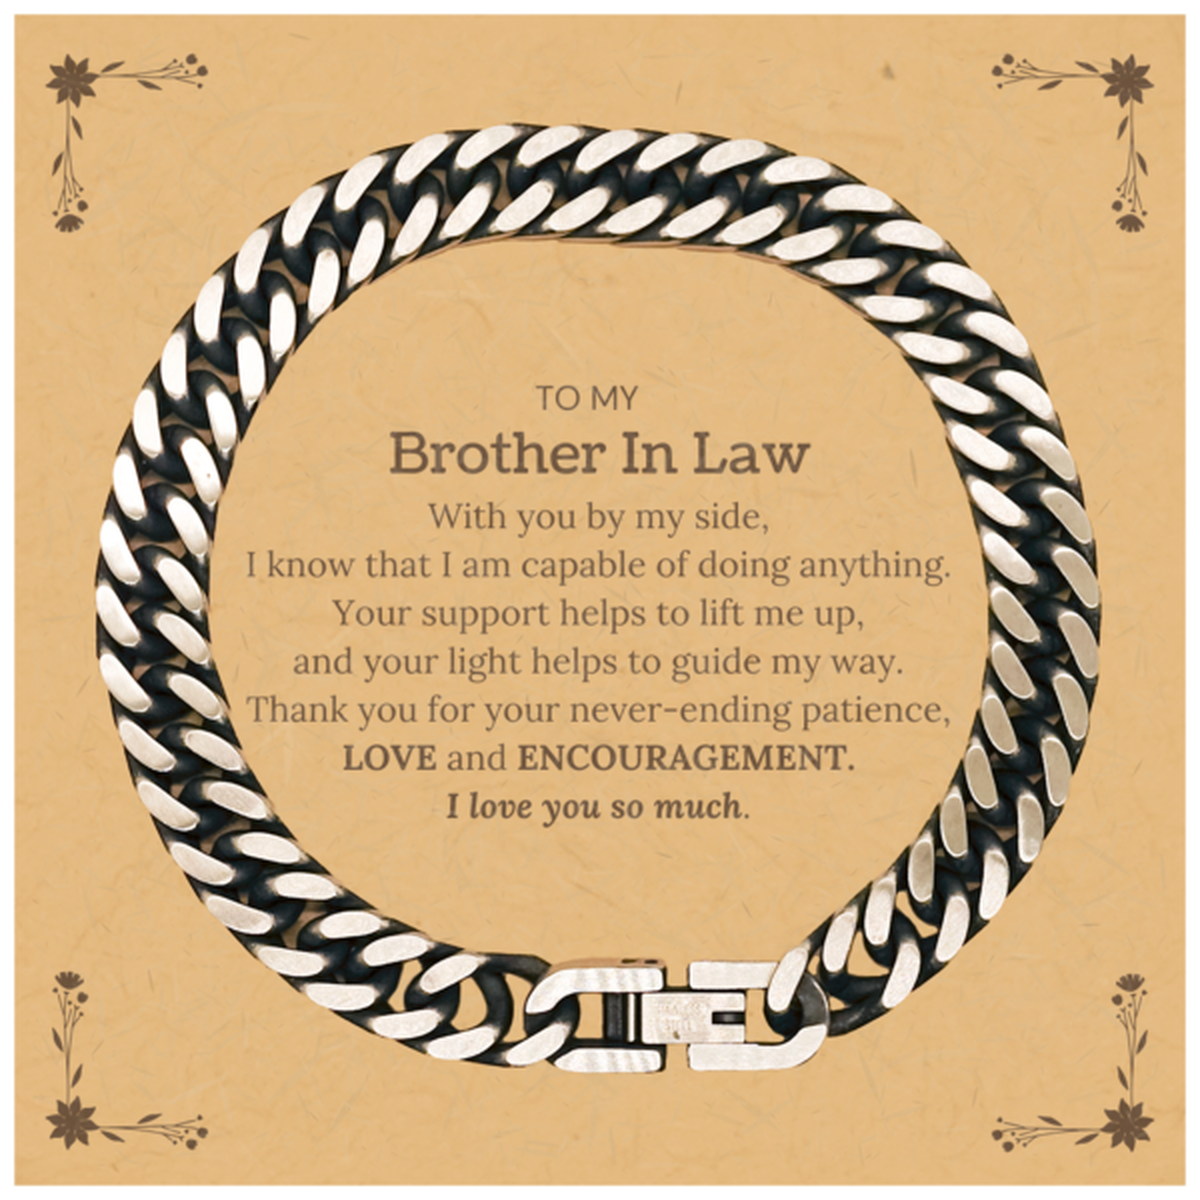 Appreciation Brother In Law Cuban Link Chain Bracelet Gifts, To My Brother In Law Birthday Christmas Wedding Keepsake Gifts for Brother In Law With you by my side, I know that I am capable of doing anything. I love you so much